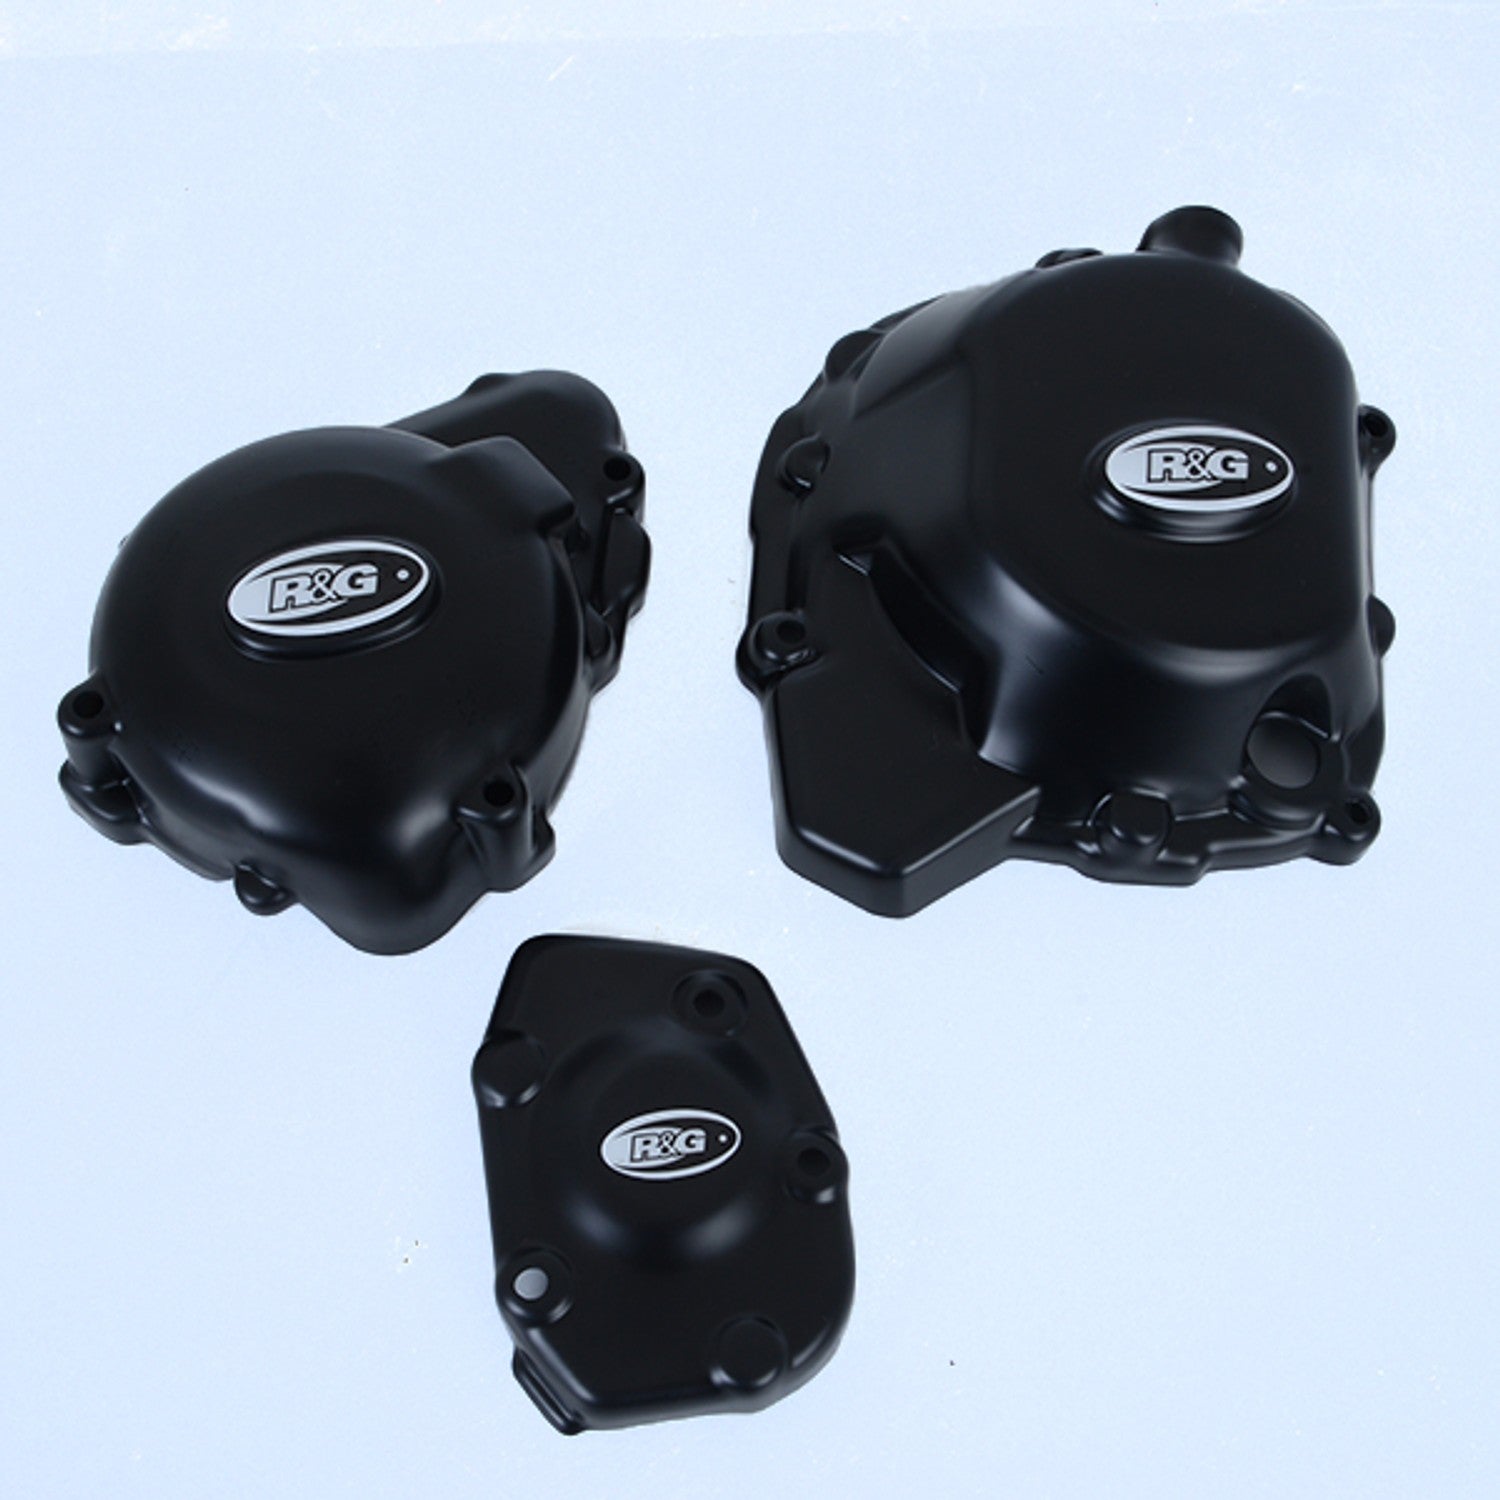 R&G Engine Case Cover Kit for Kawasaki Z900RS